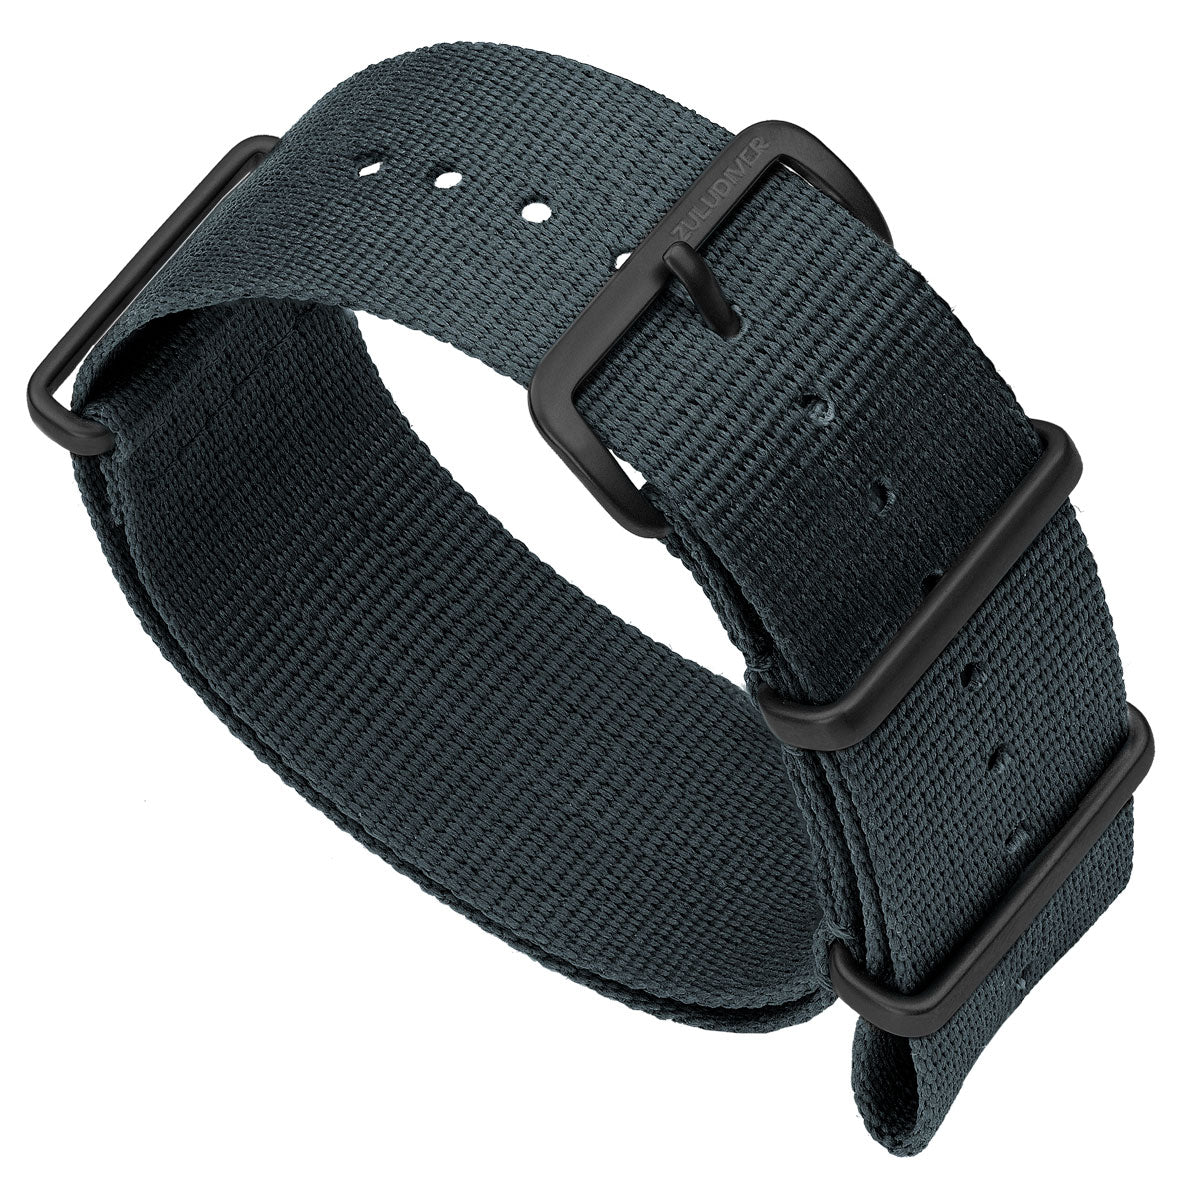 Military nylon NATO watch strap, colour admiralty grey, with IP Black finish hardware